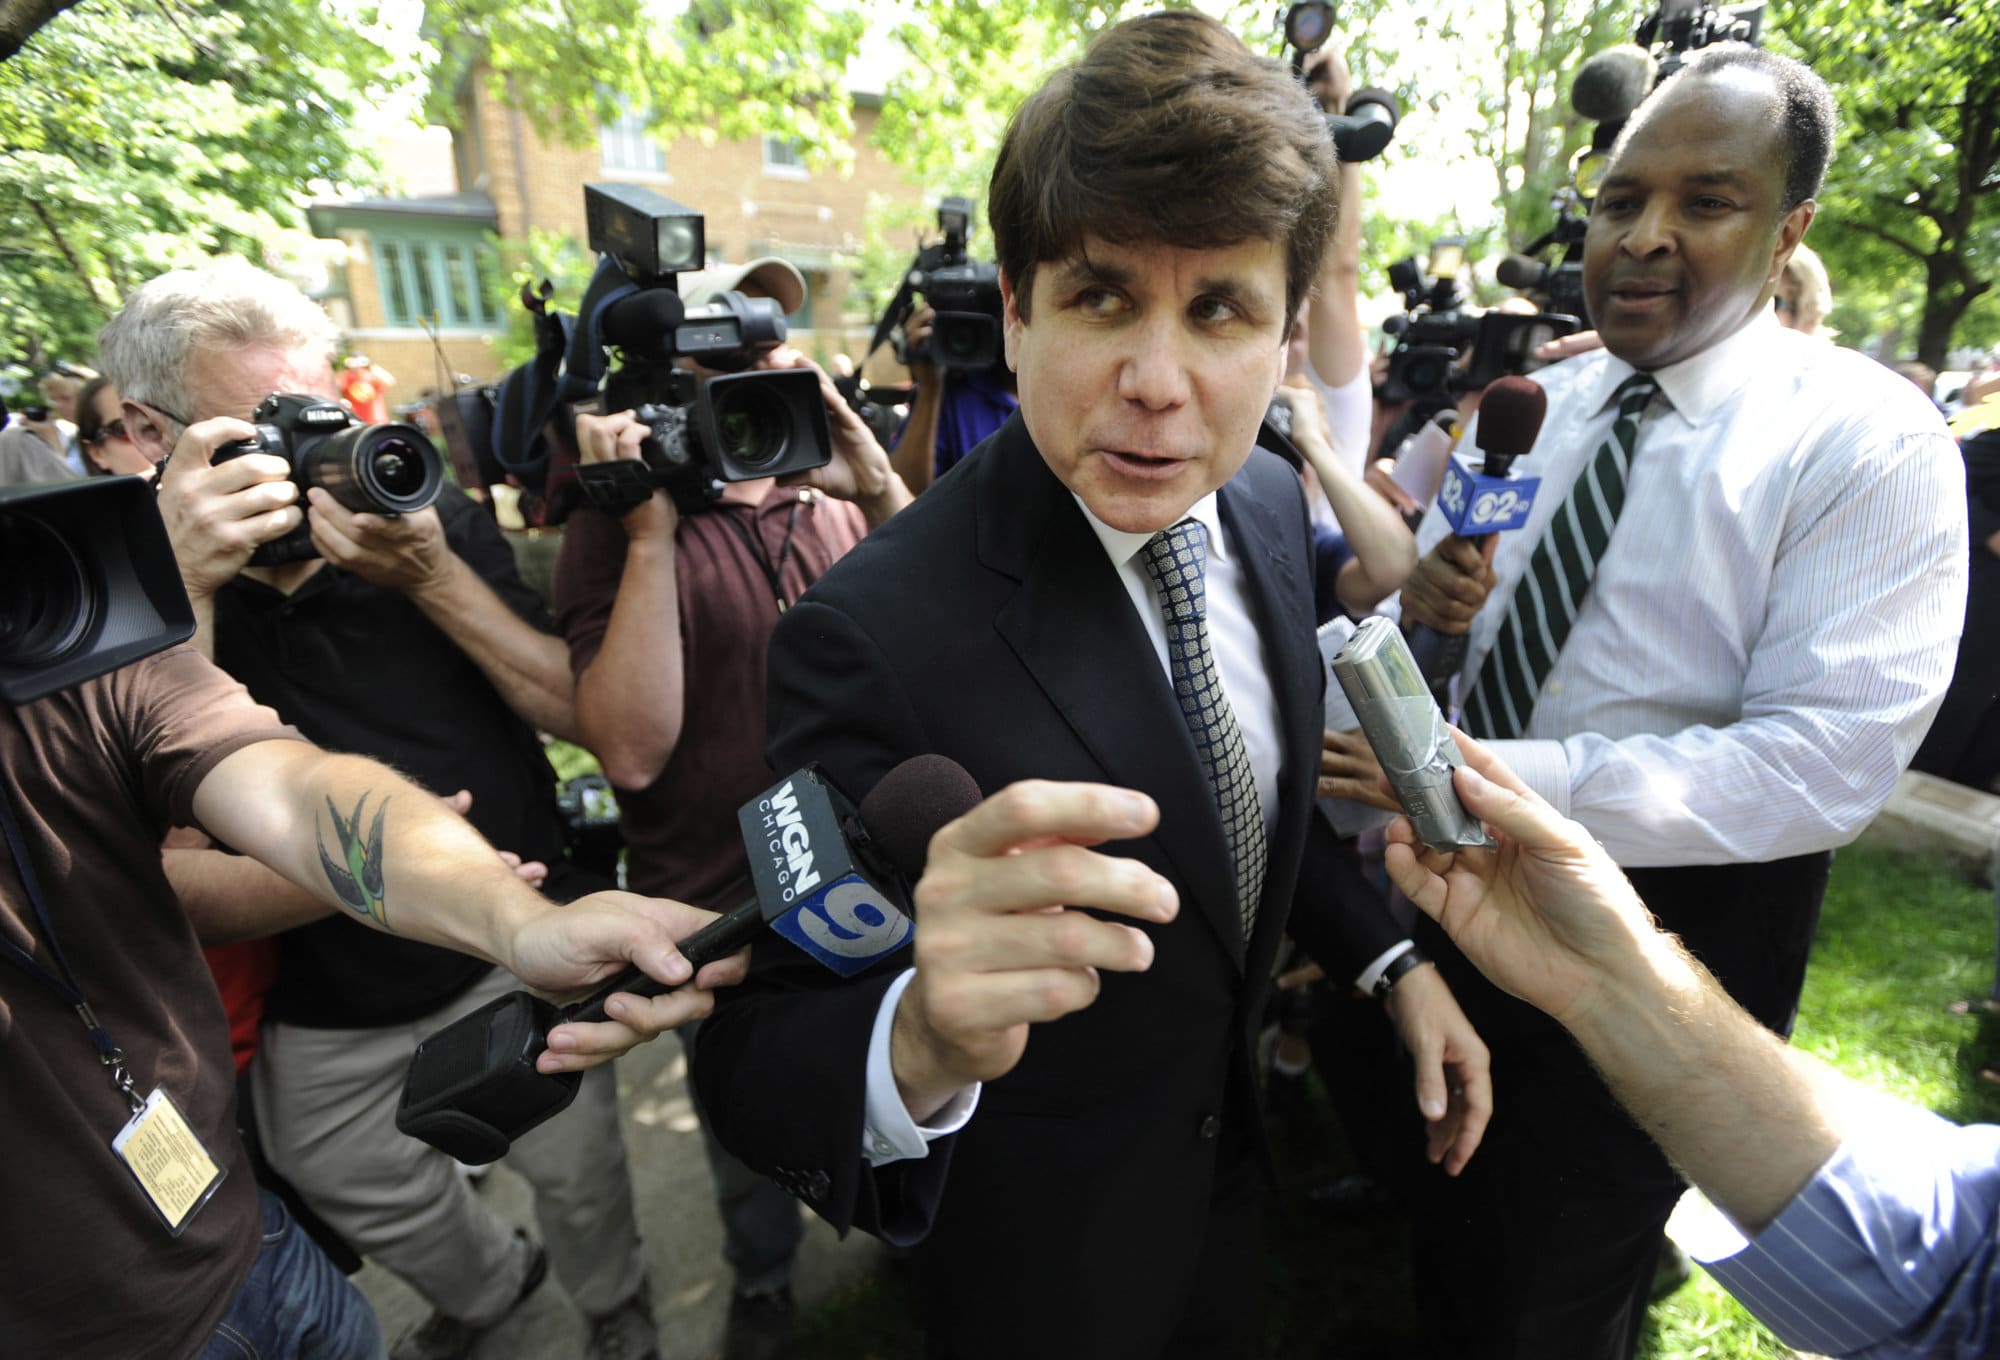 Former Illinois Gov. Rod Blagojevich greets supporters as he arrives home in Chicago, Monday, June 27, 2011, after a jury convicted him of 17 of the 20 charges against him, including all 11 charges related to his attempt to sell or trade President Barack Obama's vacated Senate seat. (AP Photo/Paul Beaty)